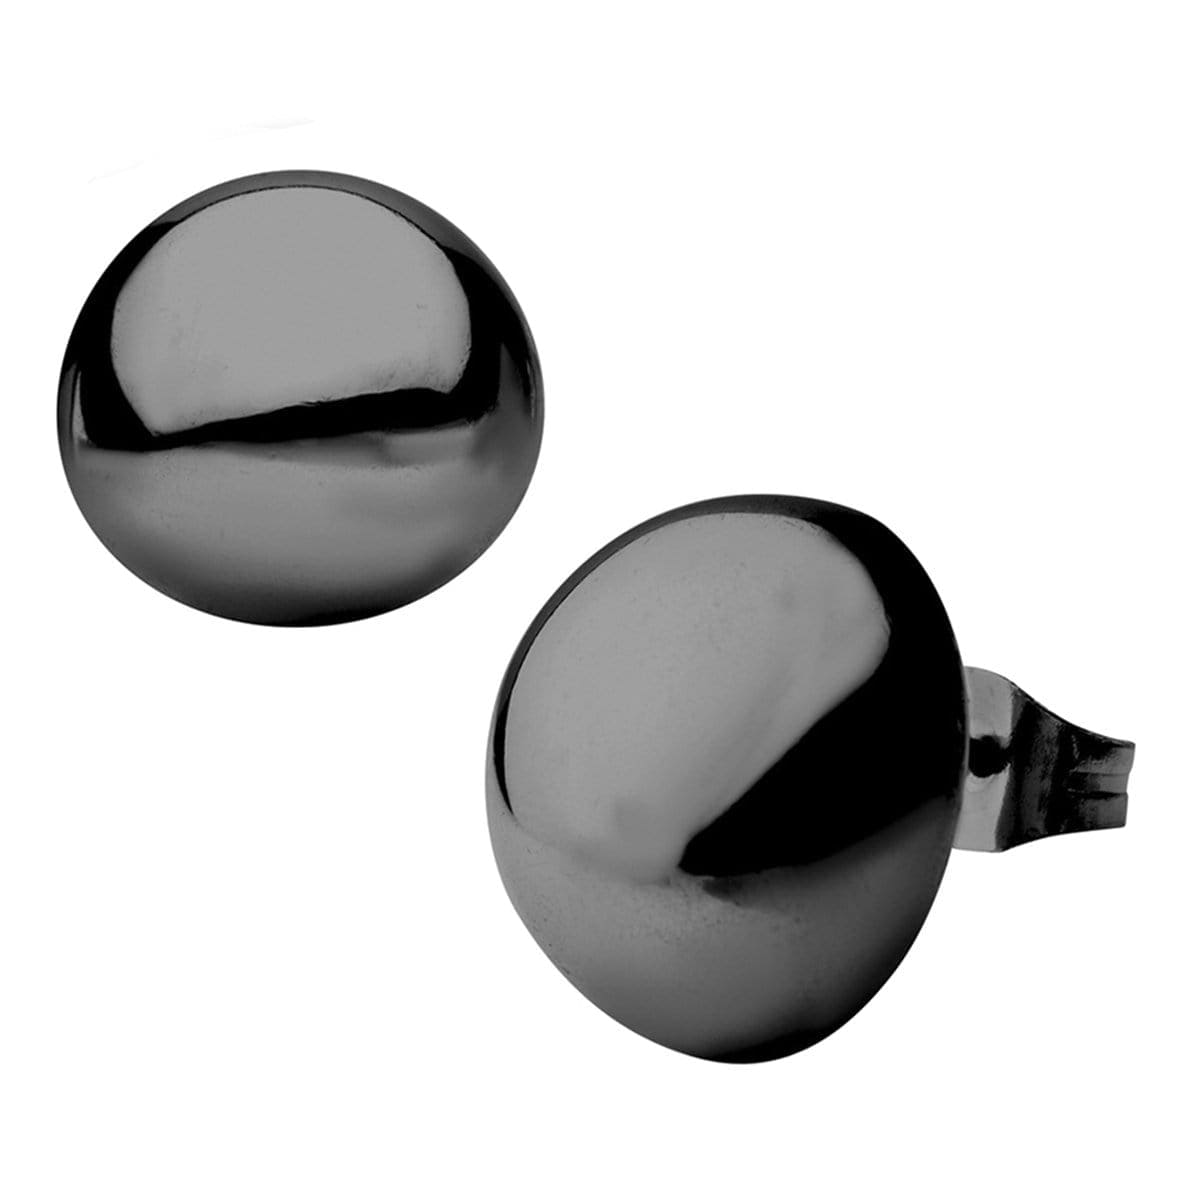 INOX JEWELRY Earrings Black Stainless Steel Large Round Dome Studs SSE4714K